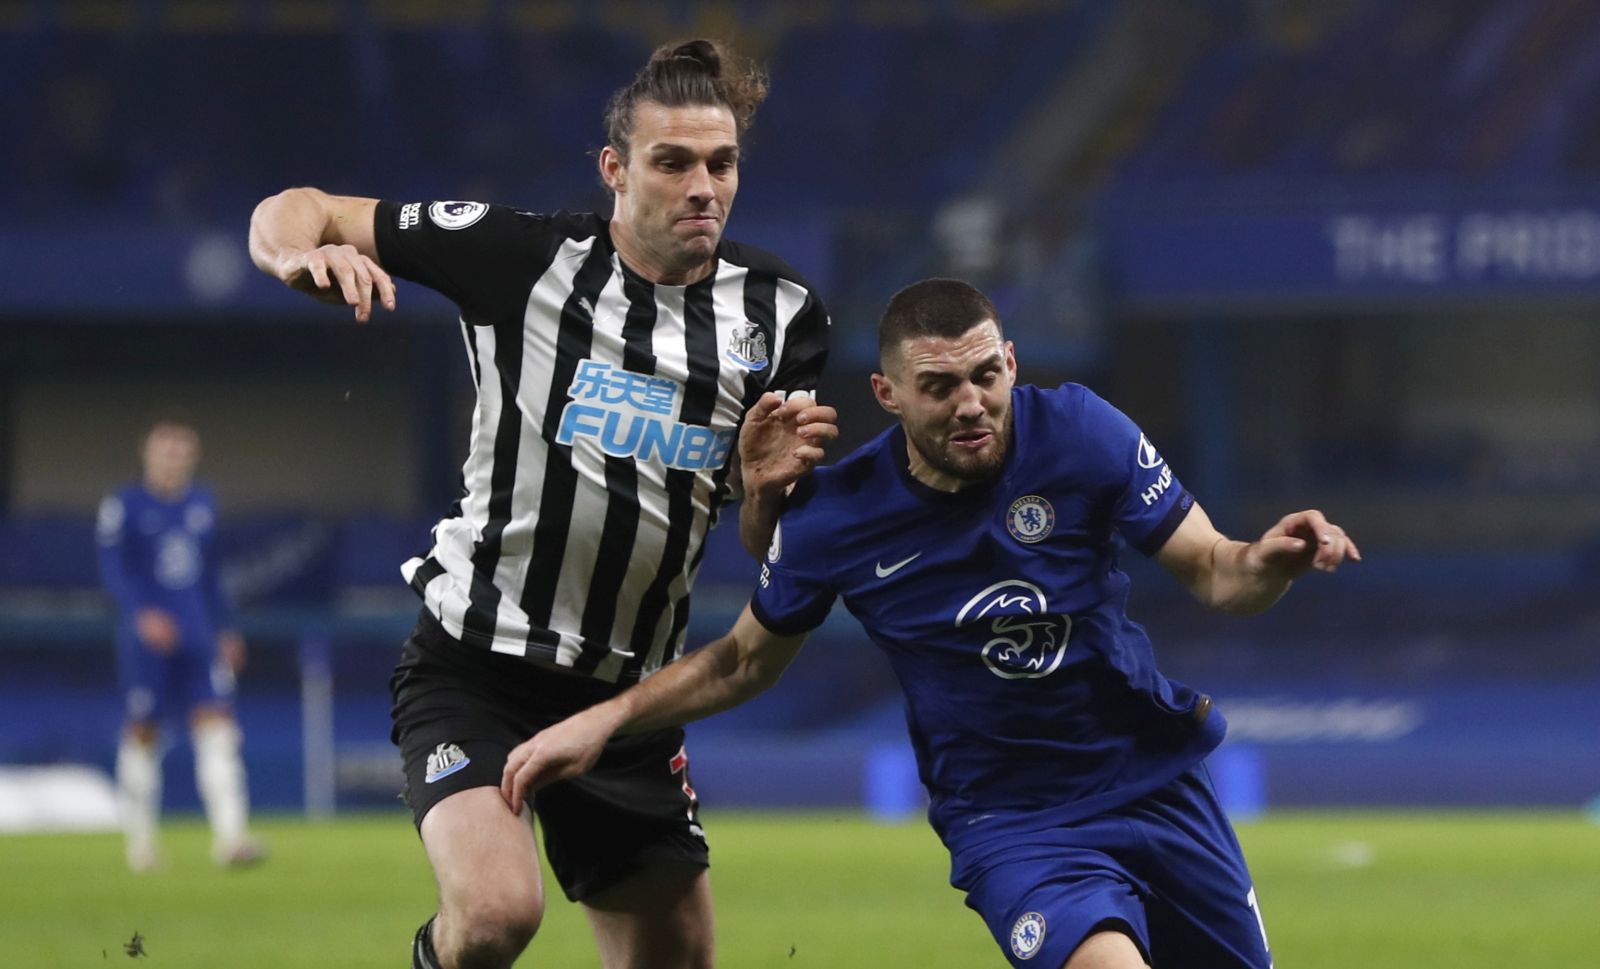 epa09015171 Chelsea's Mateo Kovacic (R) in action against Newcastle's Andy Carroll (L) during the English Premier League soccer match between Chelsea FC and Newcastle United in London, Britain, 15 February 2021.  EPA/Paul Childs / POOL EDITORIAL USE ONLY. No use with unauthorized audio, video, data, fixture lists, club/league logos or 'live' services. Online in-match use limited to 120 images, no video emulation. No use in betting, games or single club/league/player publications.